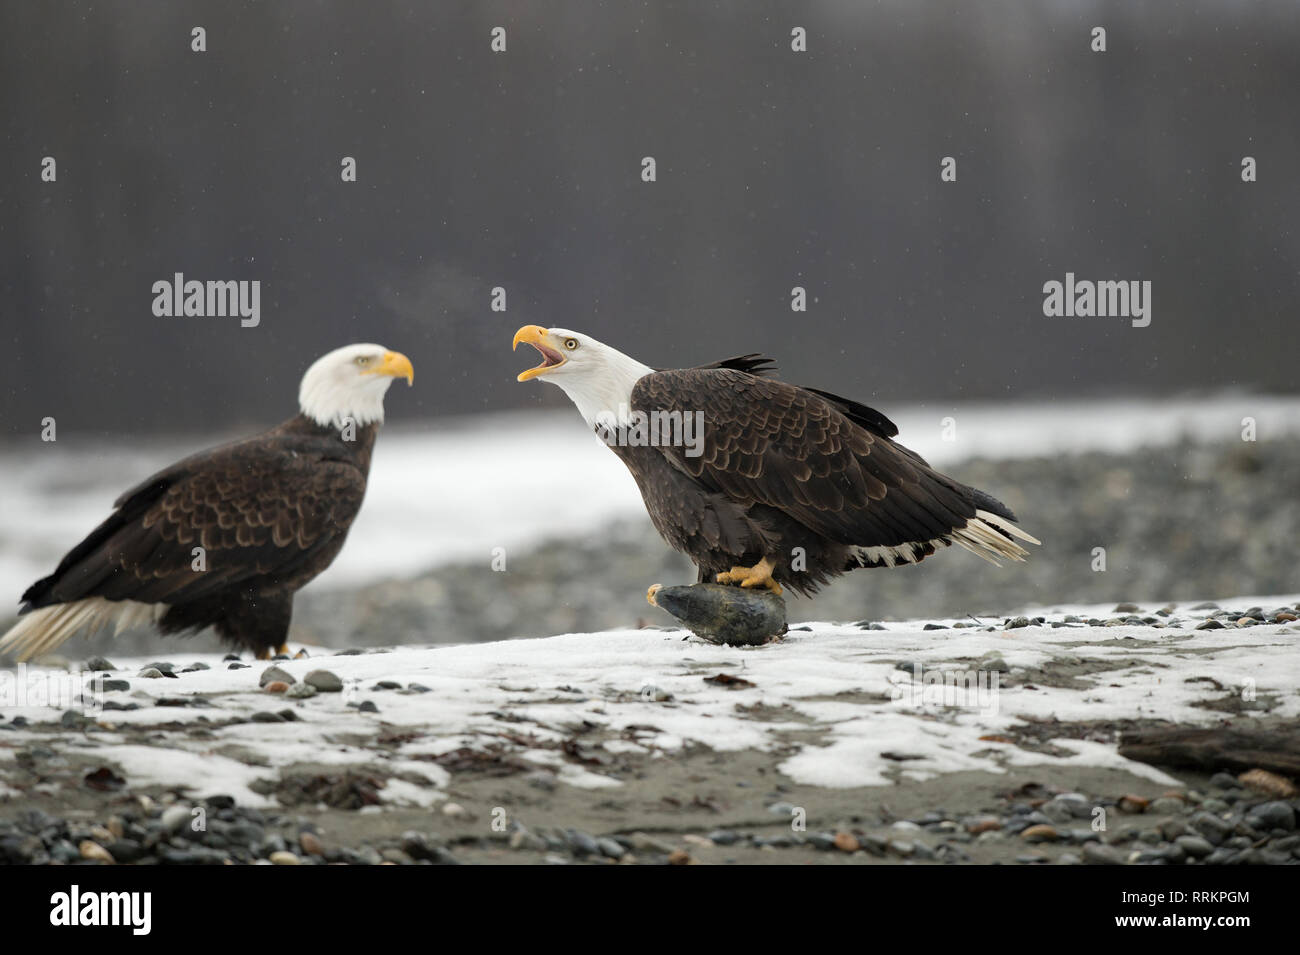 Mature bald eagle holding a chum salmon head and voicing a warning to a second eagle Stock Photo